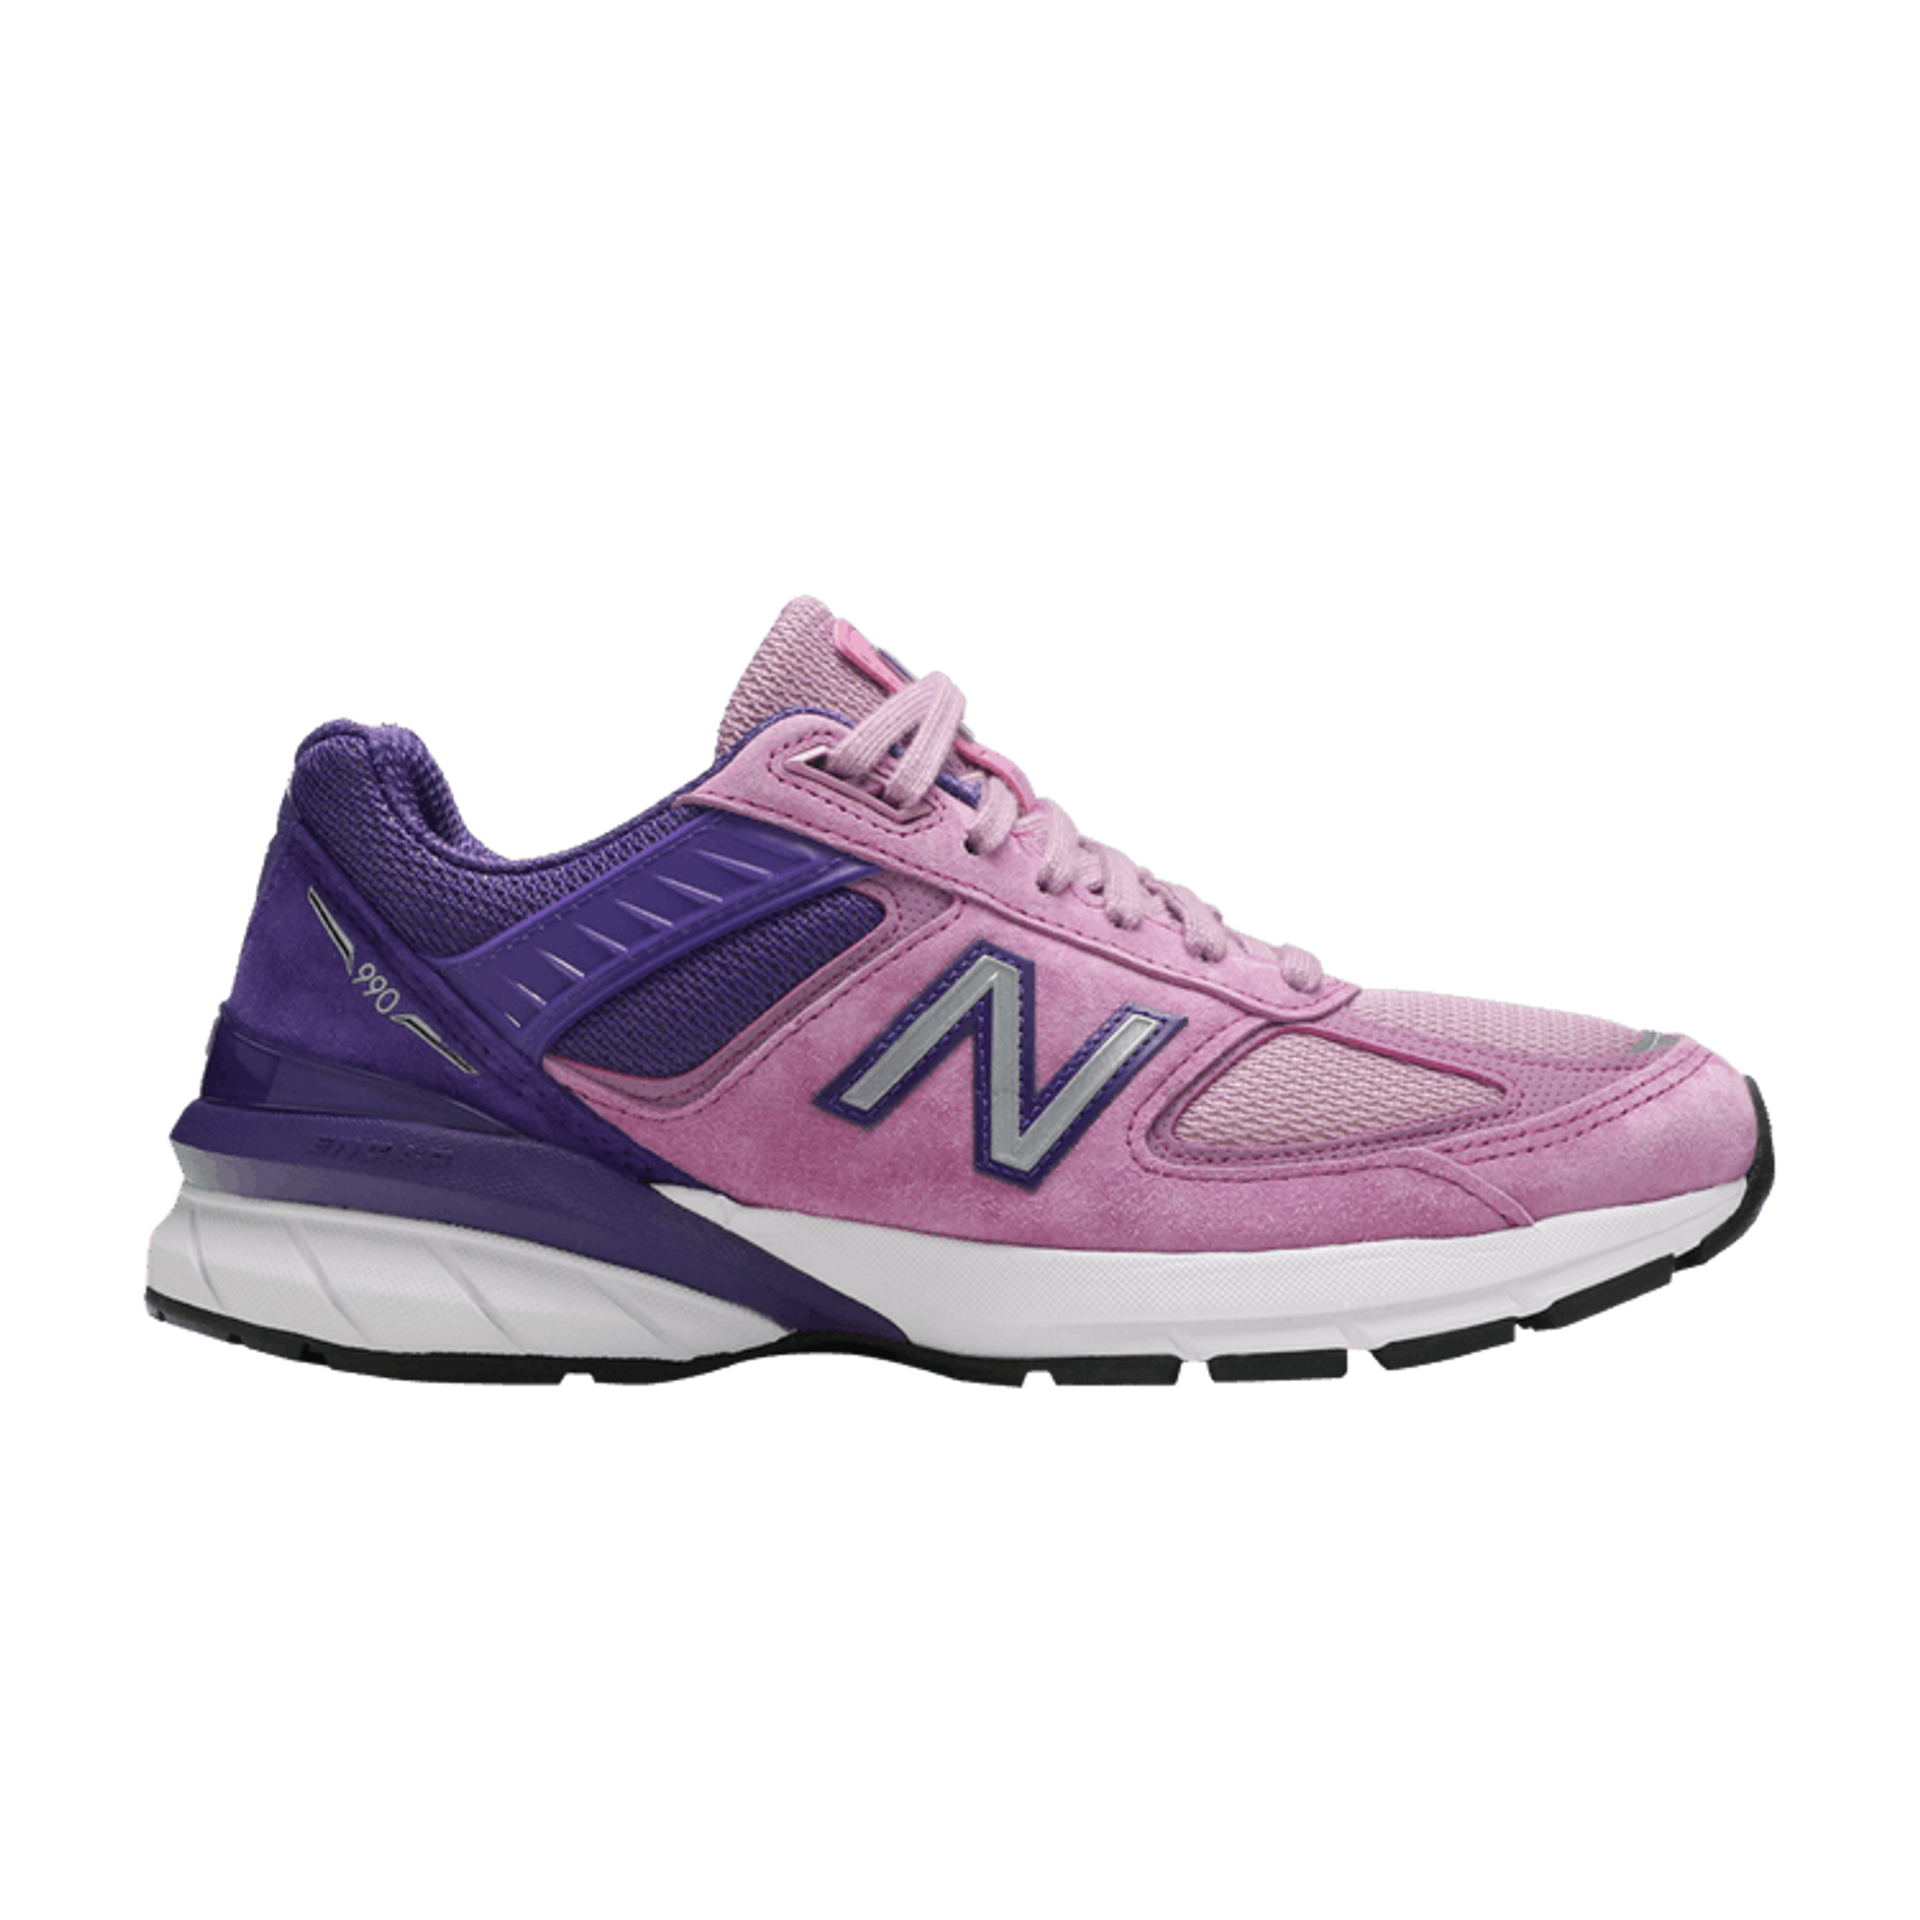 Wmns 990v5 Made in USA 'Prism Purple Pink'